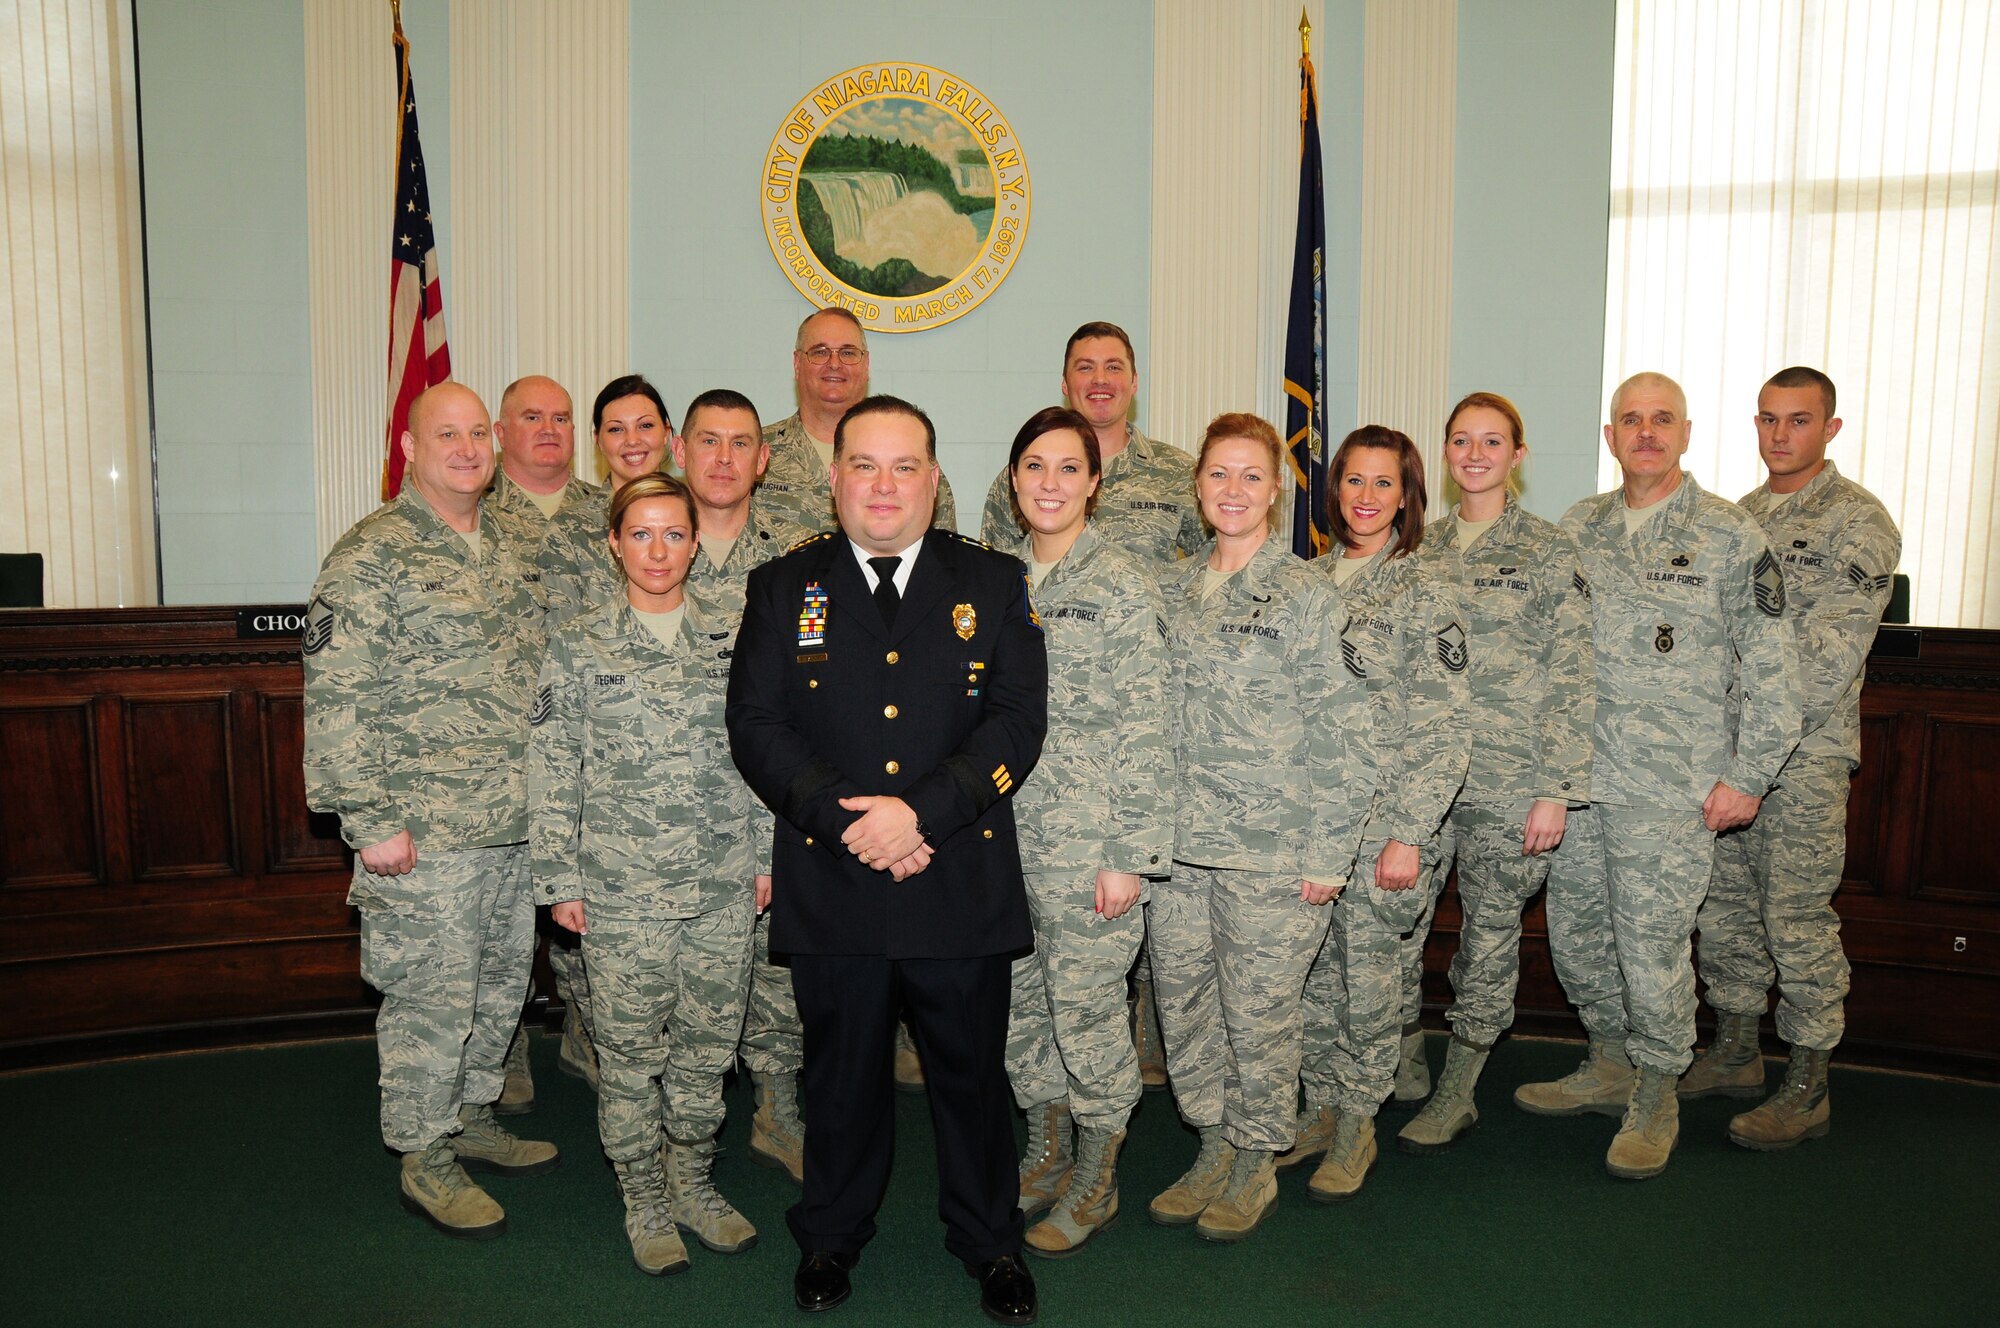 Major Bryan DalPorto, 107th Airlift Wing's Force Support Squadron (FSS) Commander was named the new police superintendent for the city of Niagara Falls, N. Y. and stands with members of his Squadron. Jan 4, 2013 (Air National Guard  Photo/Senior Master Sgt Ray Lloyd)

